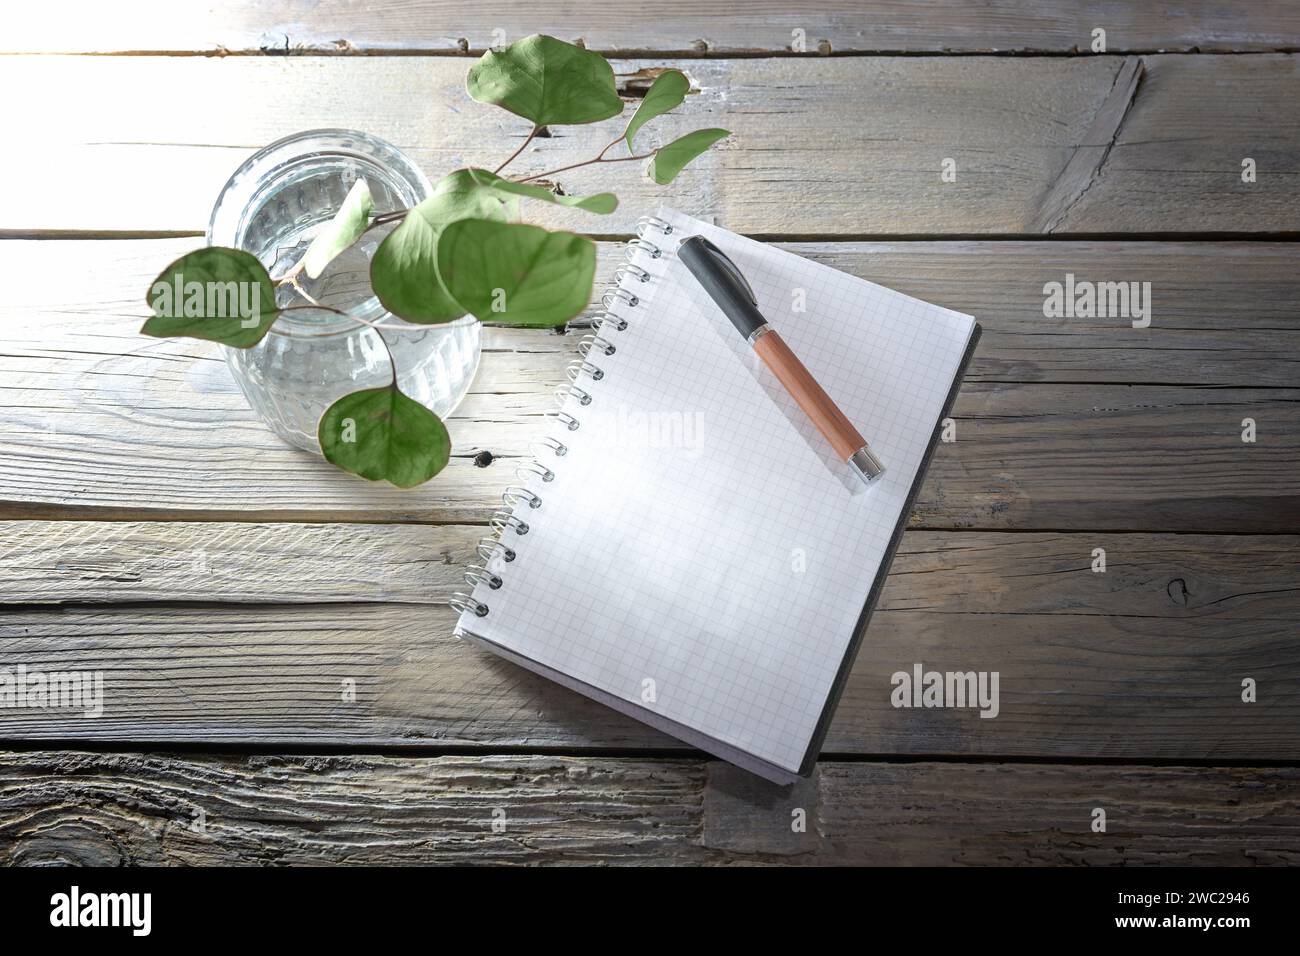 Blank spiral notepad with grid paper, pen and a glass vase with some leaves on a rustic table made of old wooden planks, mockup for notes or a message Stock Photo